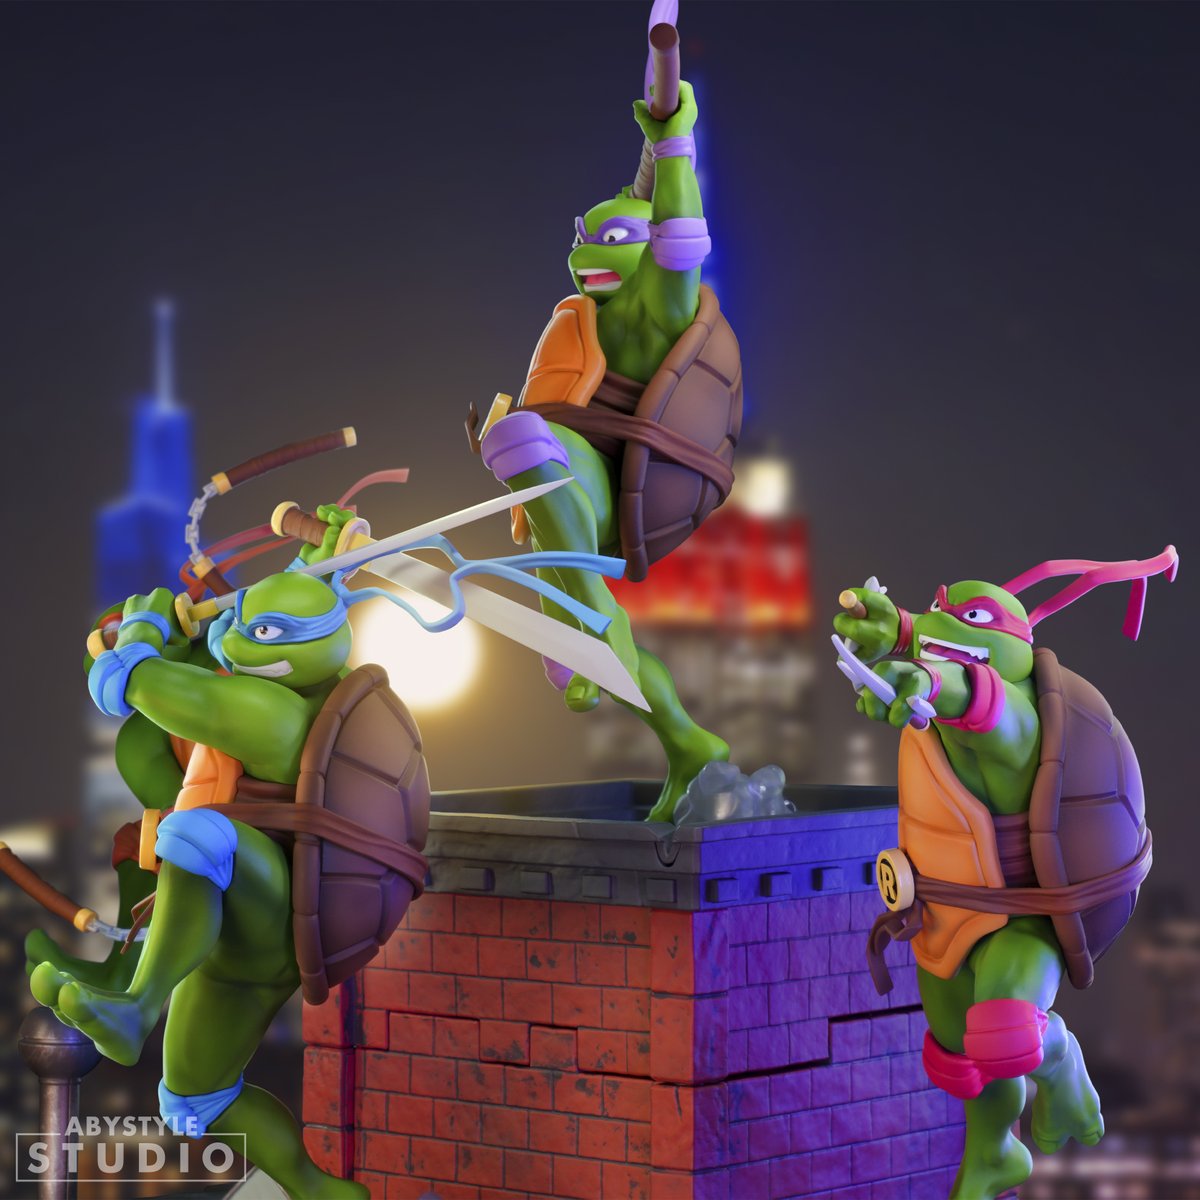 Have you ordered your copies of TMNT? 🔥 Michelangelo & Leonardo are available now, and you can pre-order Donatello & Raphael, which will arrive at the end of June! ▶️ Shop now: linktr.ee/abystyle_studio #TMNT